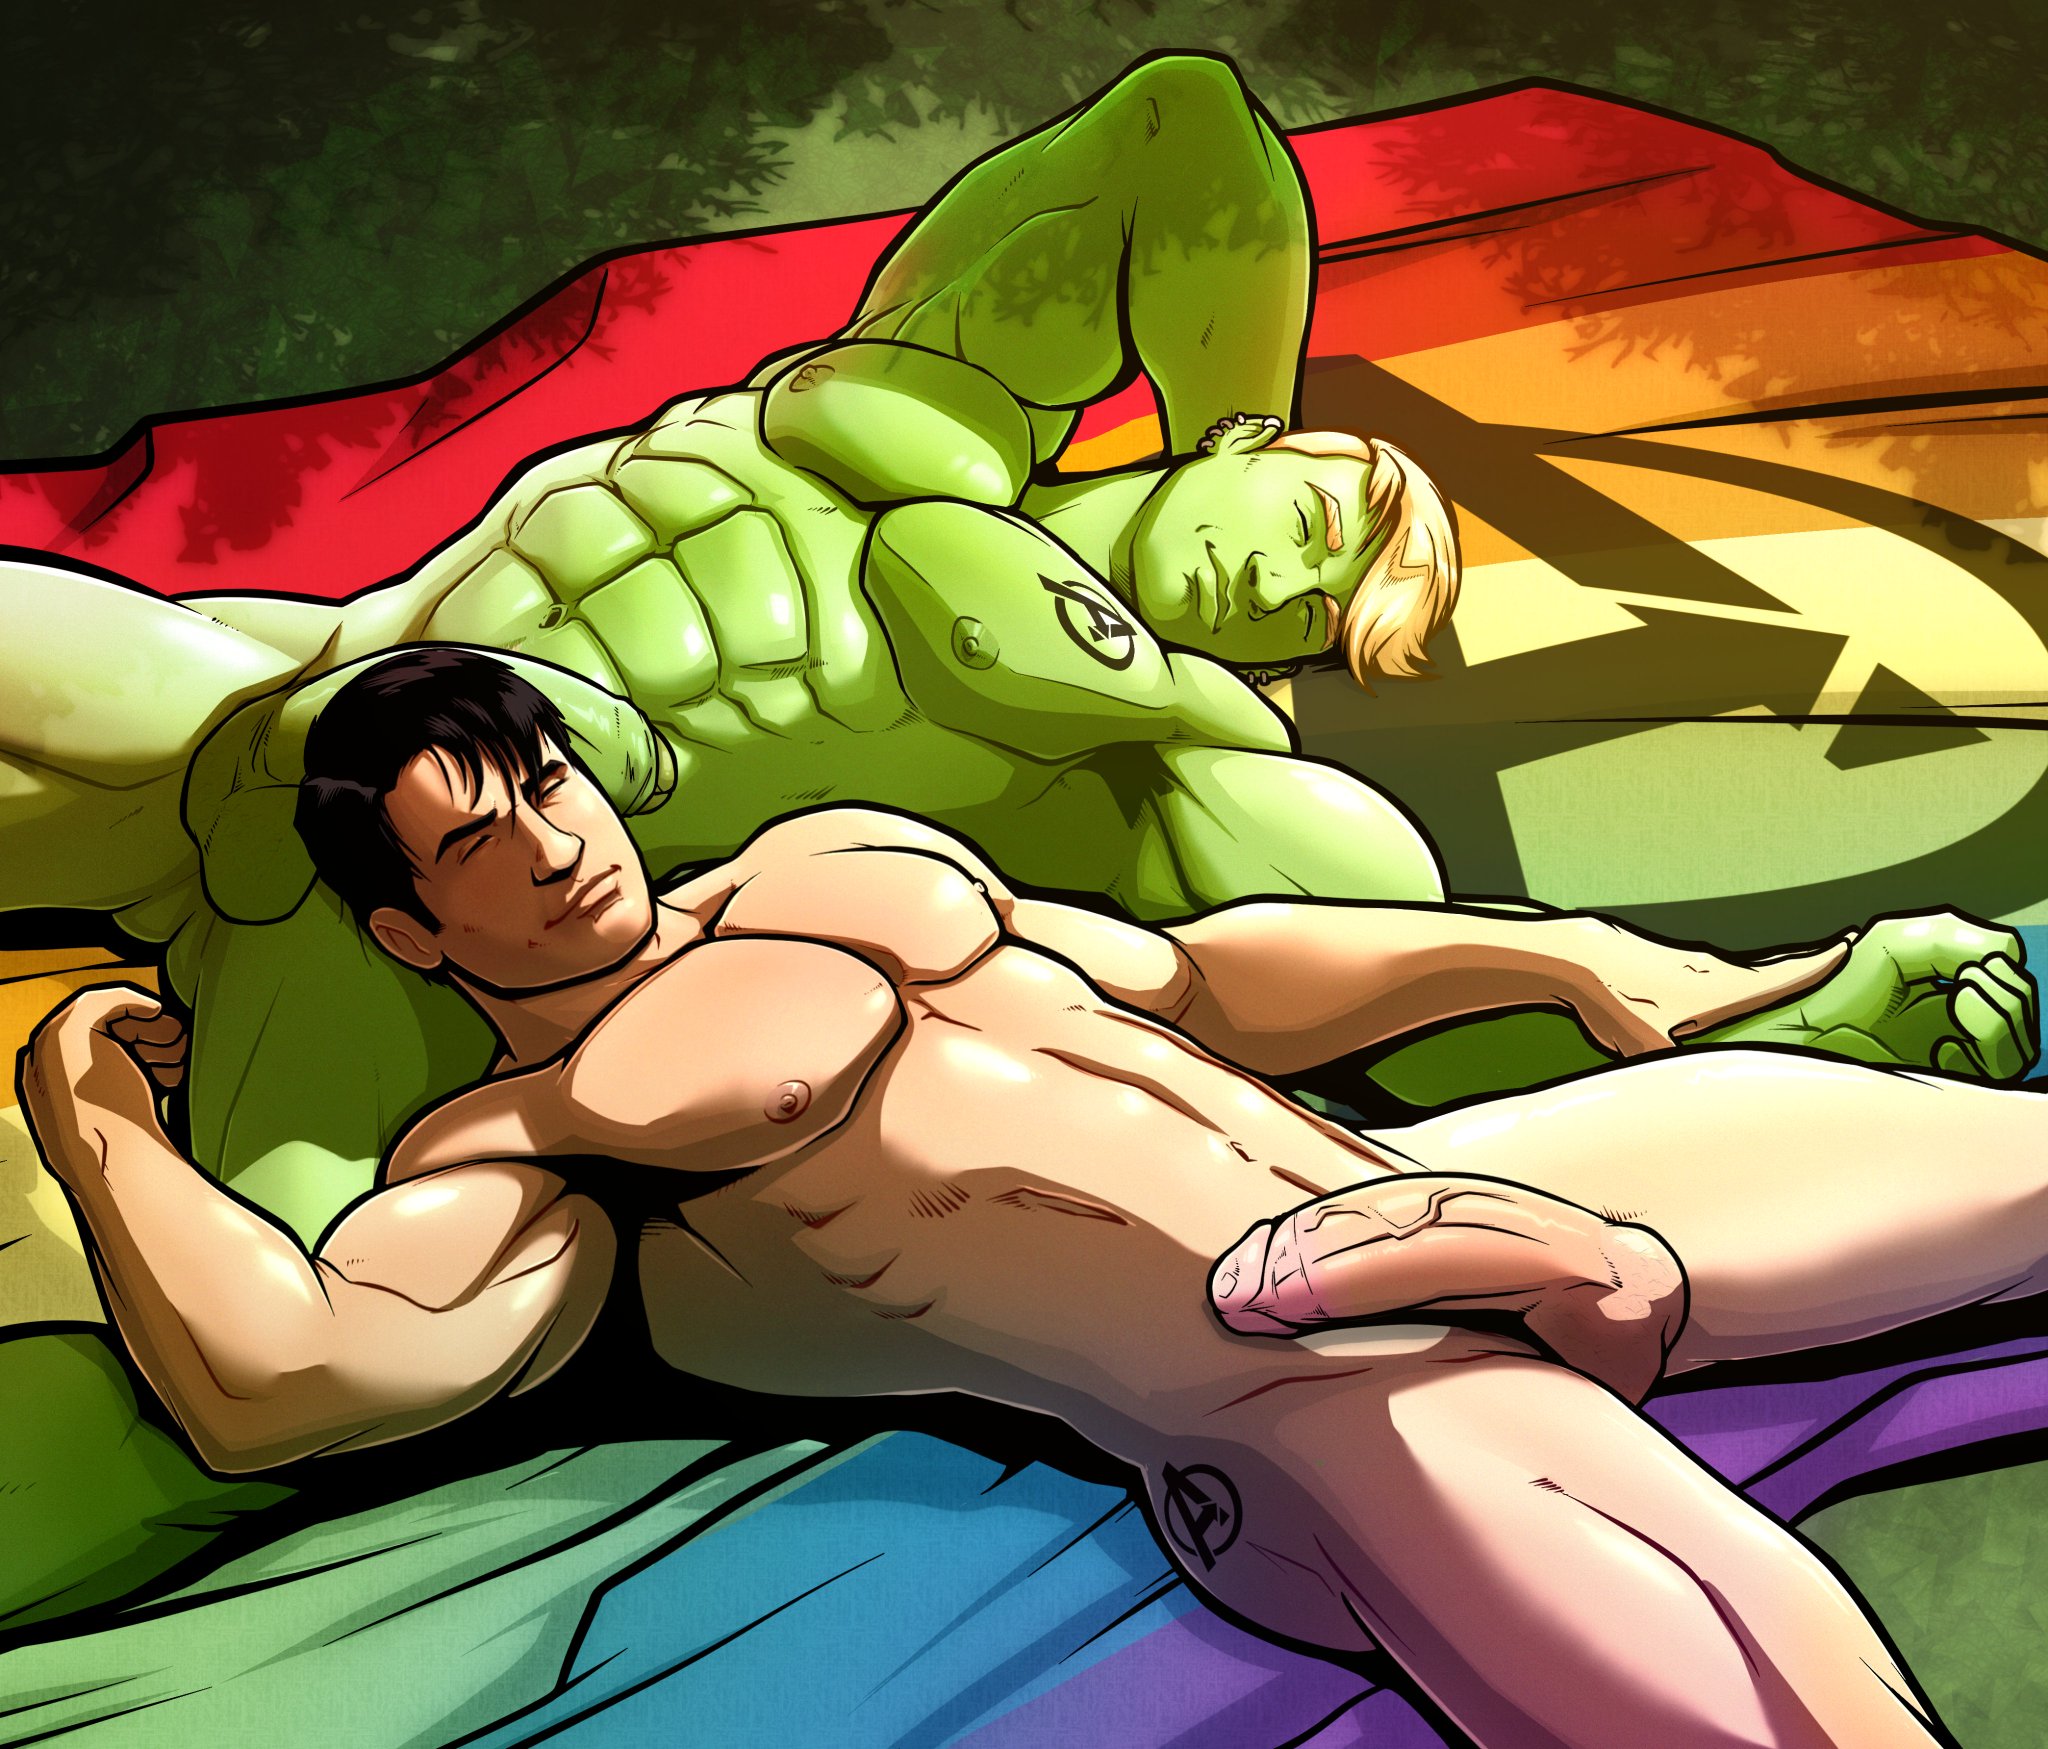 Wiccan And Hulkling - Throwback Thursday https://t.co/9S9dqHOLYY https://t....